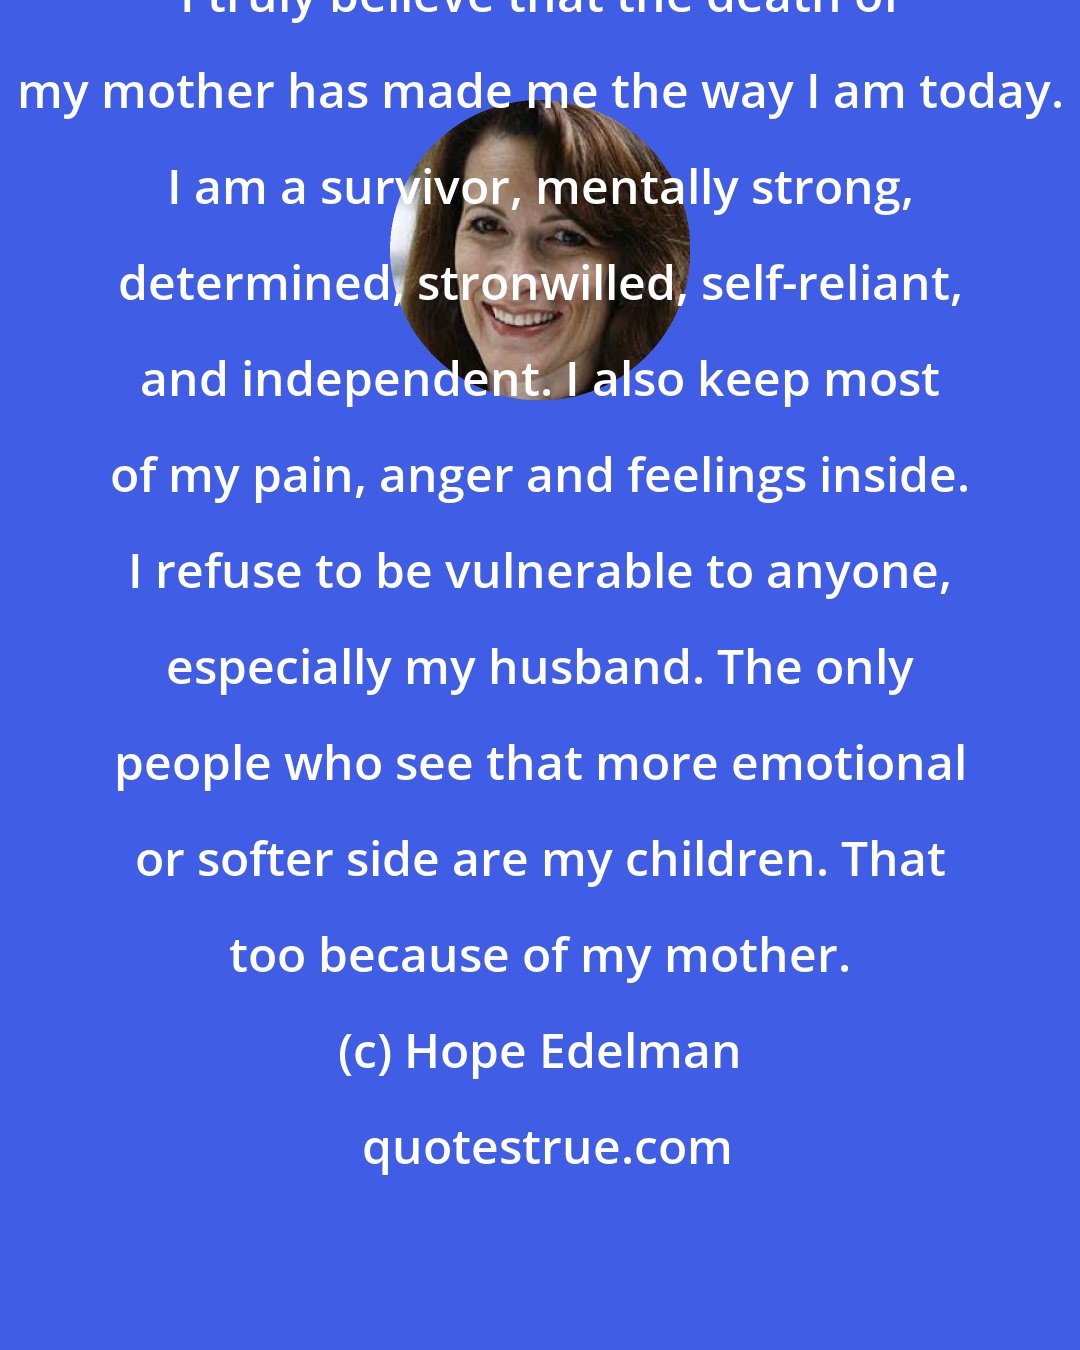 Hope Edelman: I truly believe that the death of my mother has made me the way I am today. I am a survivor, mentally strong, determined, stronwilled, self-reliant, and independent. I also keep most of my pain, anger and feelings inside. I refuse to be vulnerable to anyone, especially my husband. The only people who see that more emotional or softer side are my children. That too because of my mother.